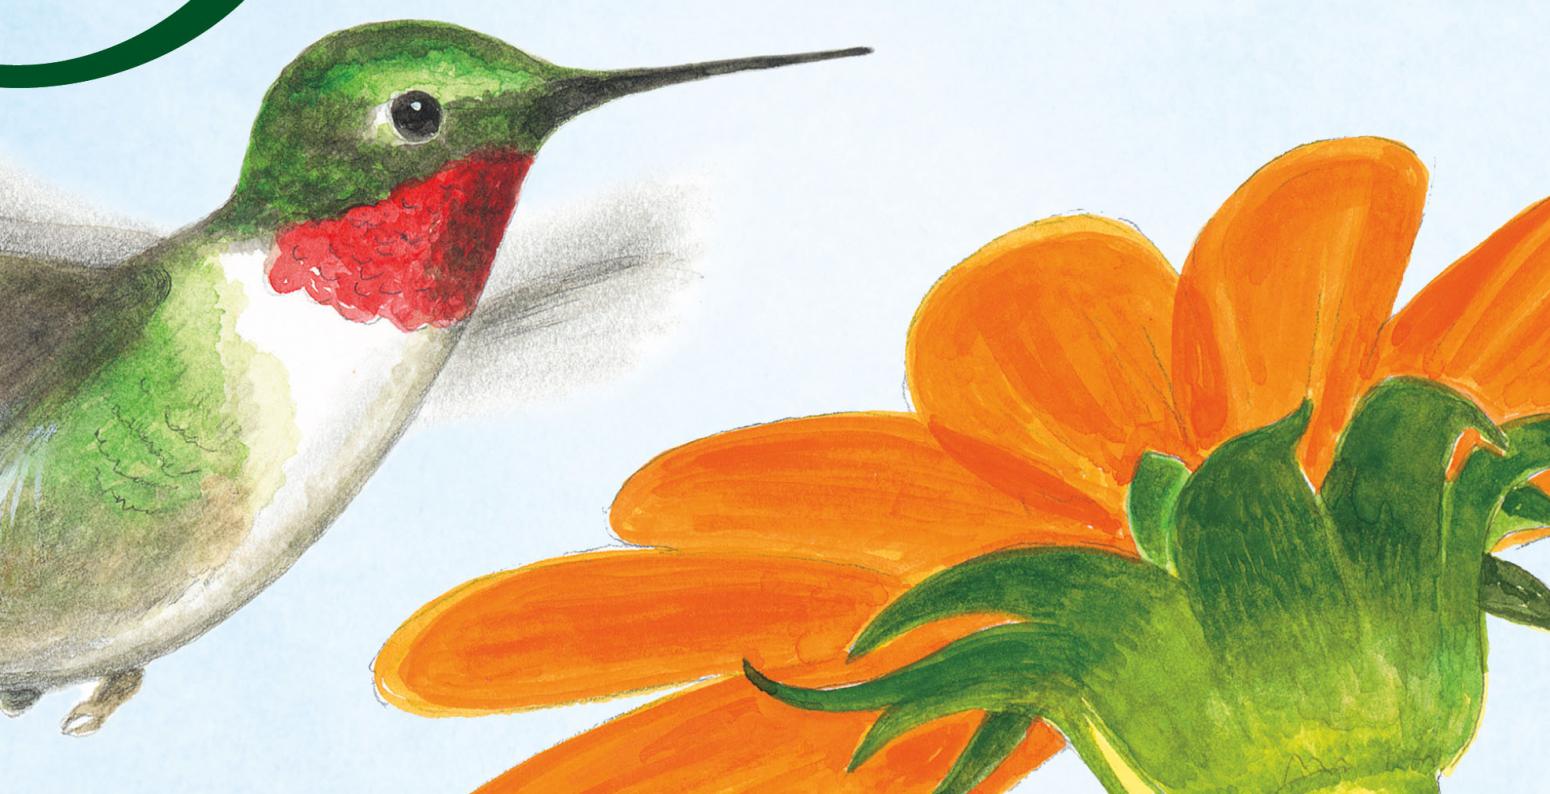 Book cover of Tiny Bird, showing a hummingbird flying towards an orange flower.